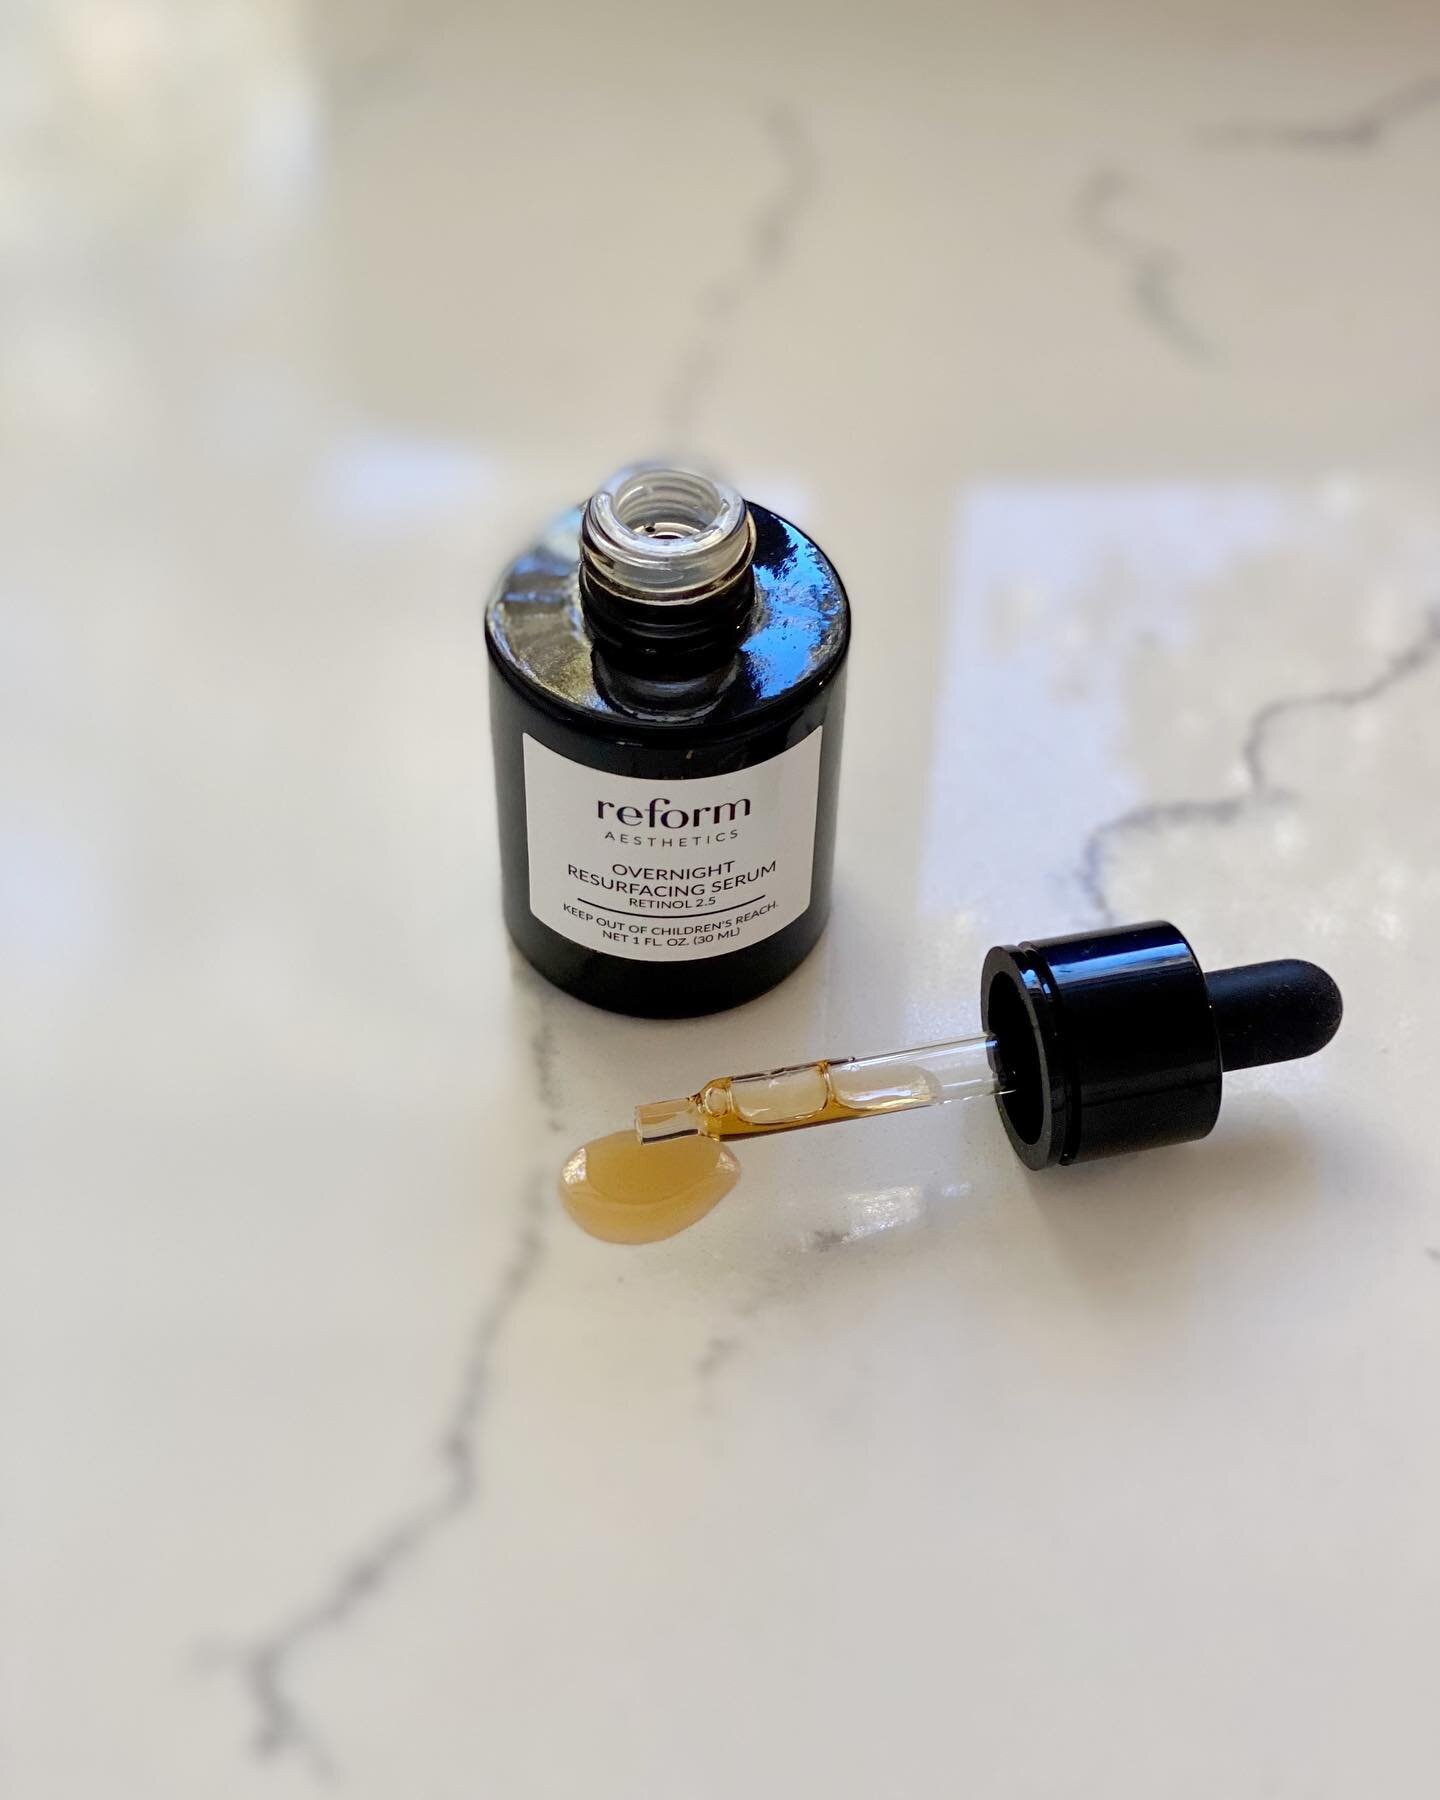 PSA - don't be afraid of a little dryness after starting a retinol! If you want to see changes in your skin, you should expect to see a little something!

If you&rsquo;re not crazy about the dryness and flaking, you can take a few nights off, moistur